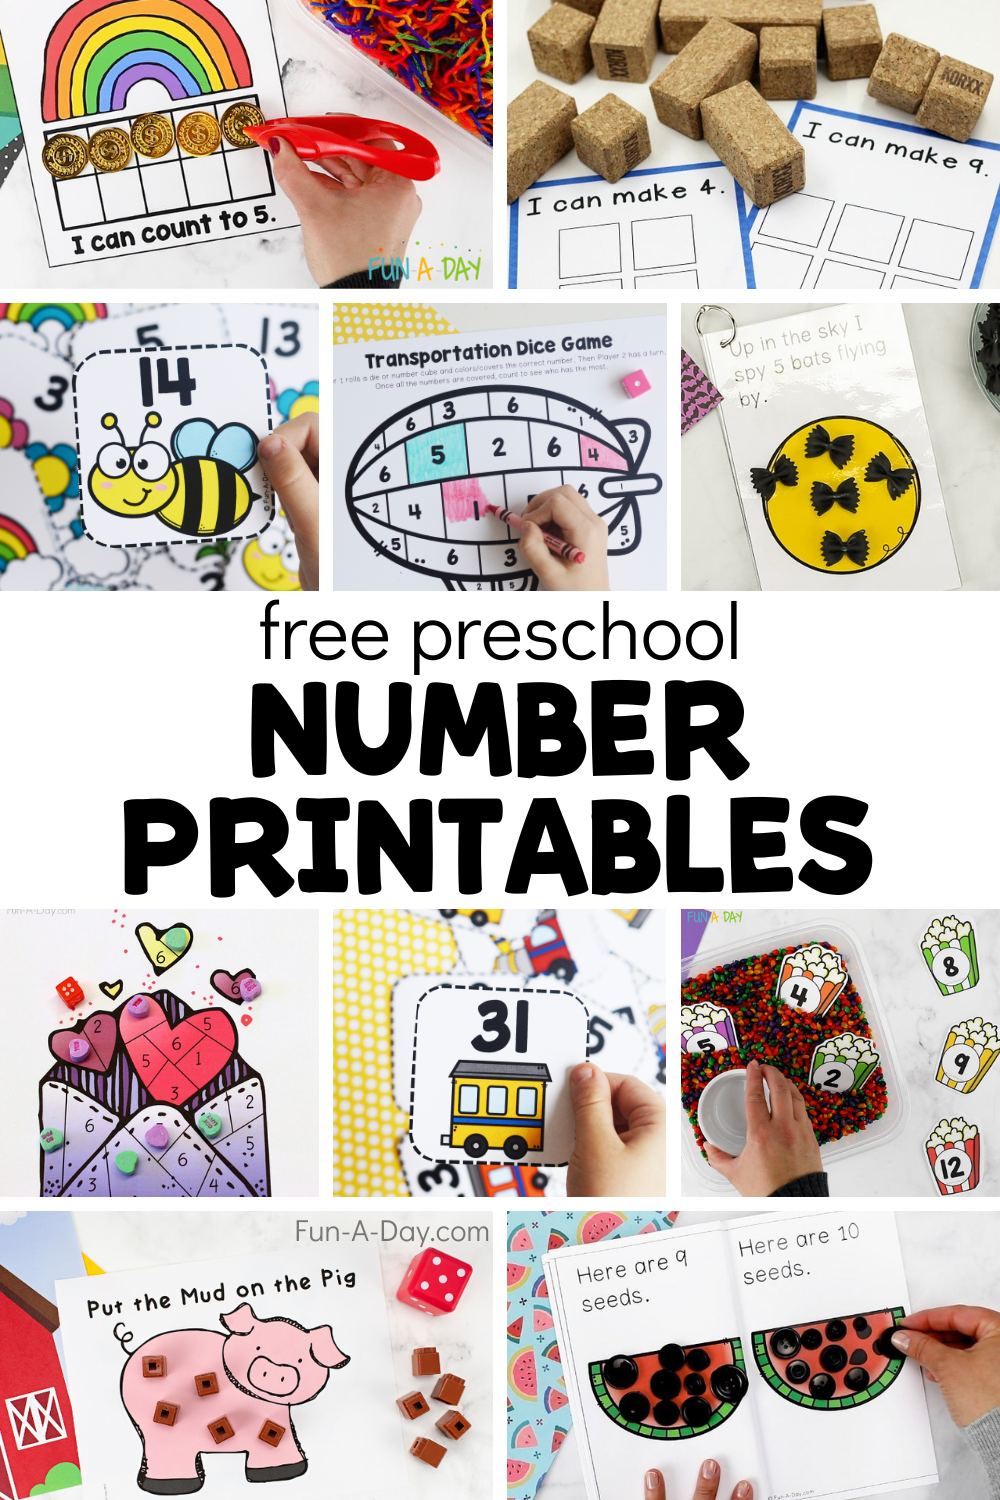 counting activities with text that reads free preschool number printables